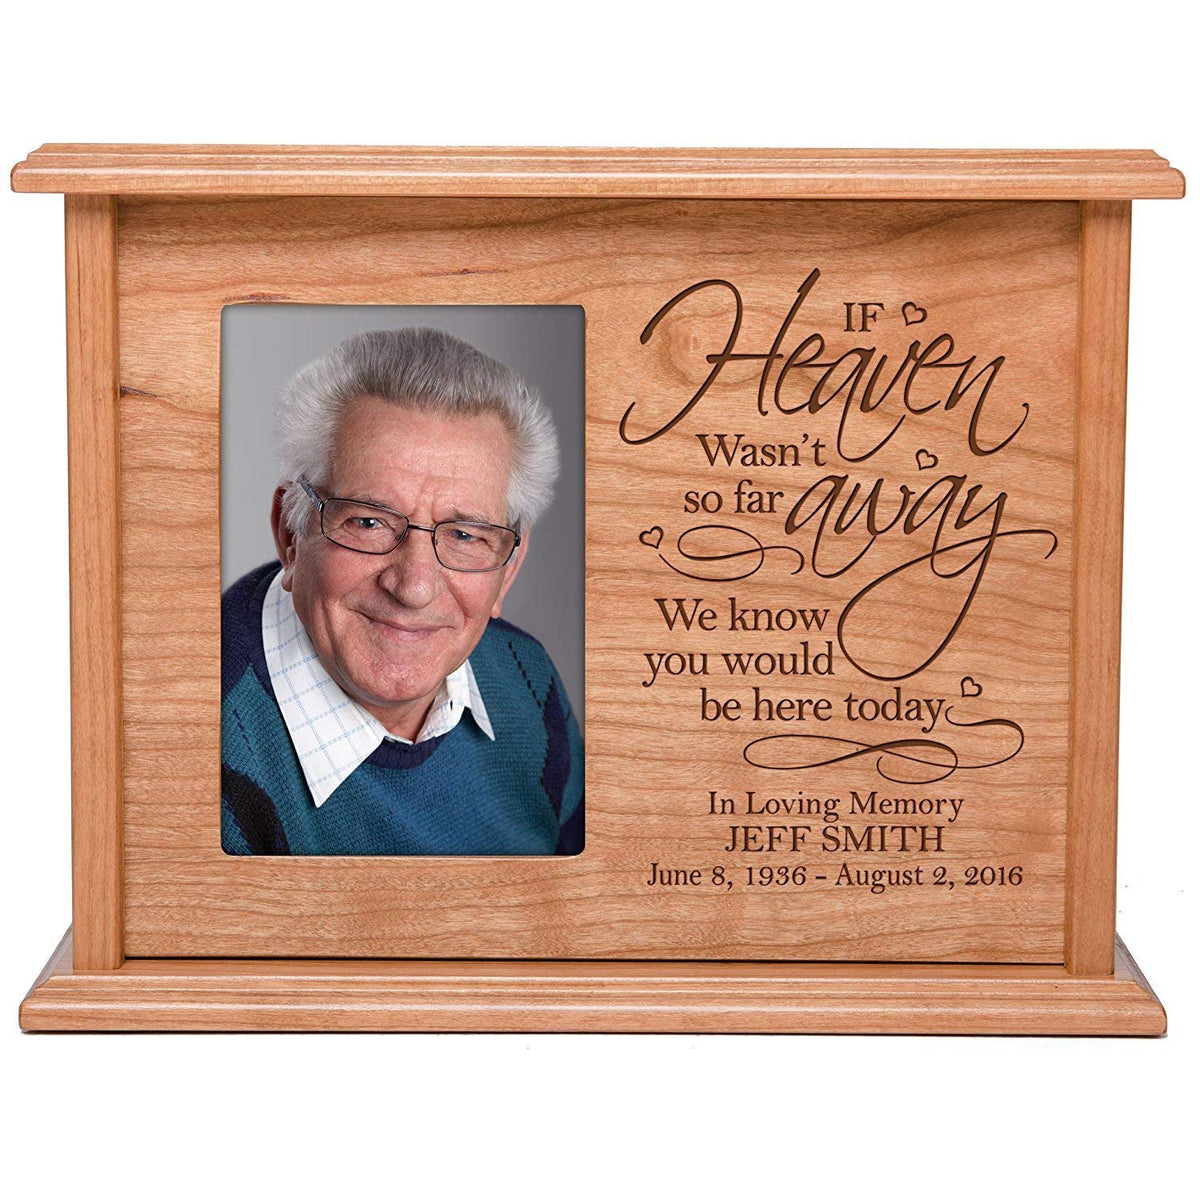 Custom Engraved Cherry Wood Urn Box with 4x6 Photo holds 200 cu in of Human Ashes If Heaven - LifeSong Milestones